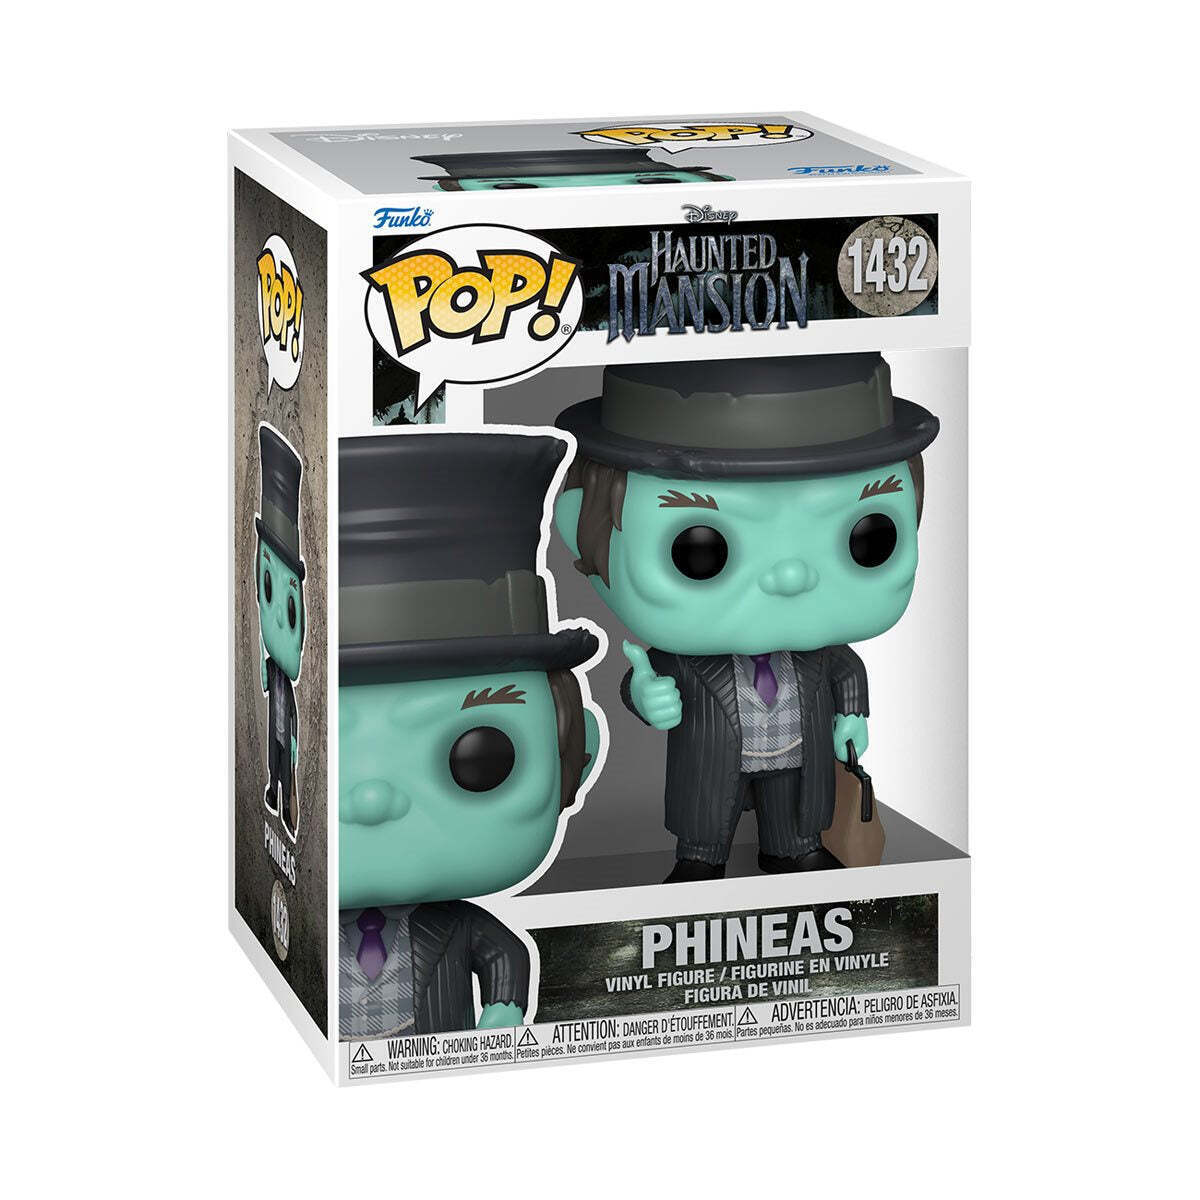 Phineas #1432 (Haunted Mansion, Funko Pop)